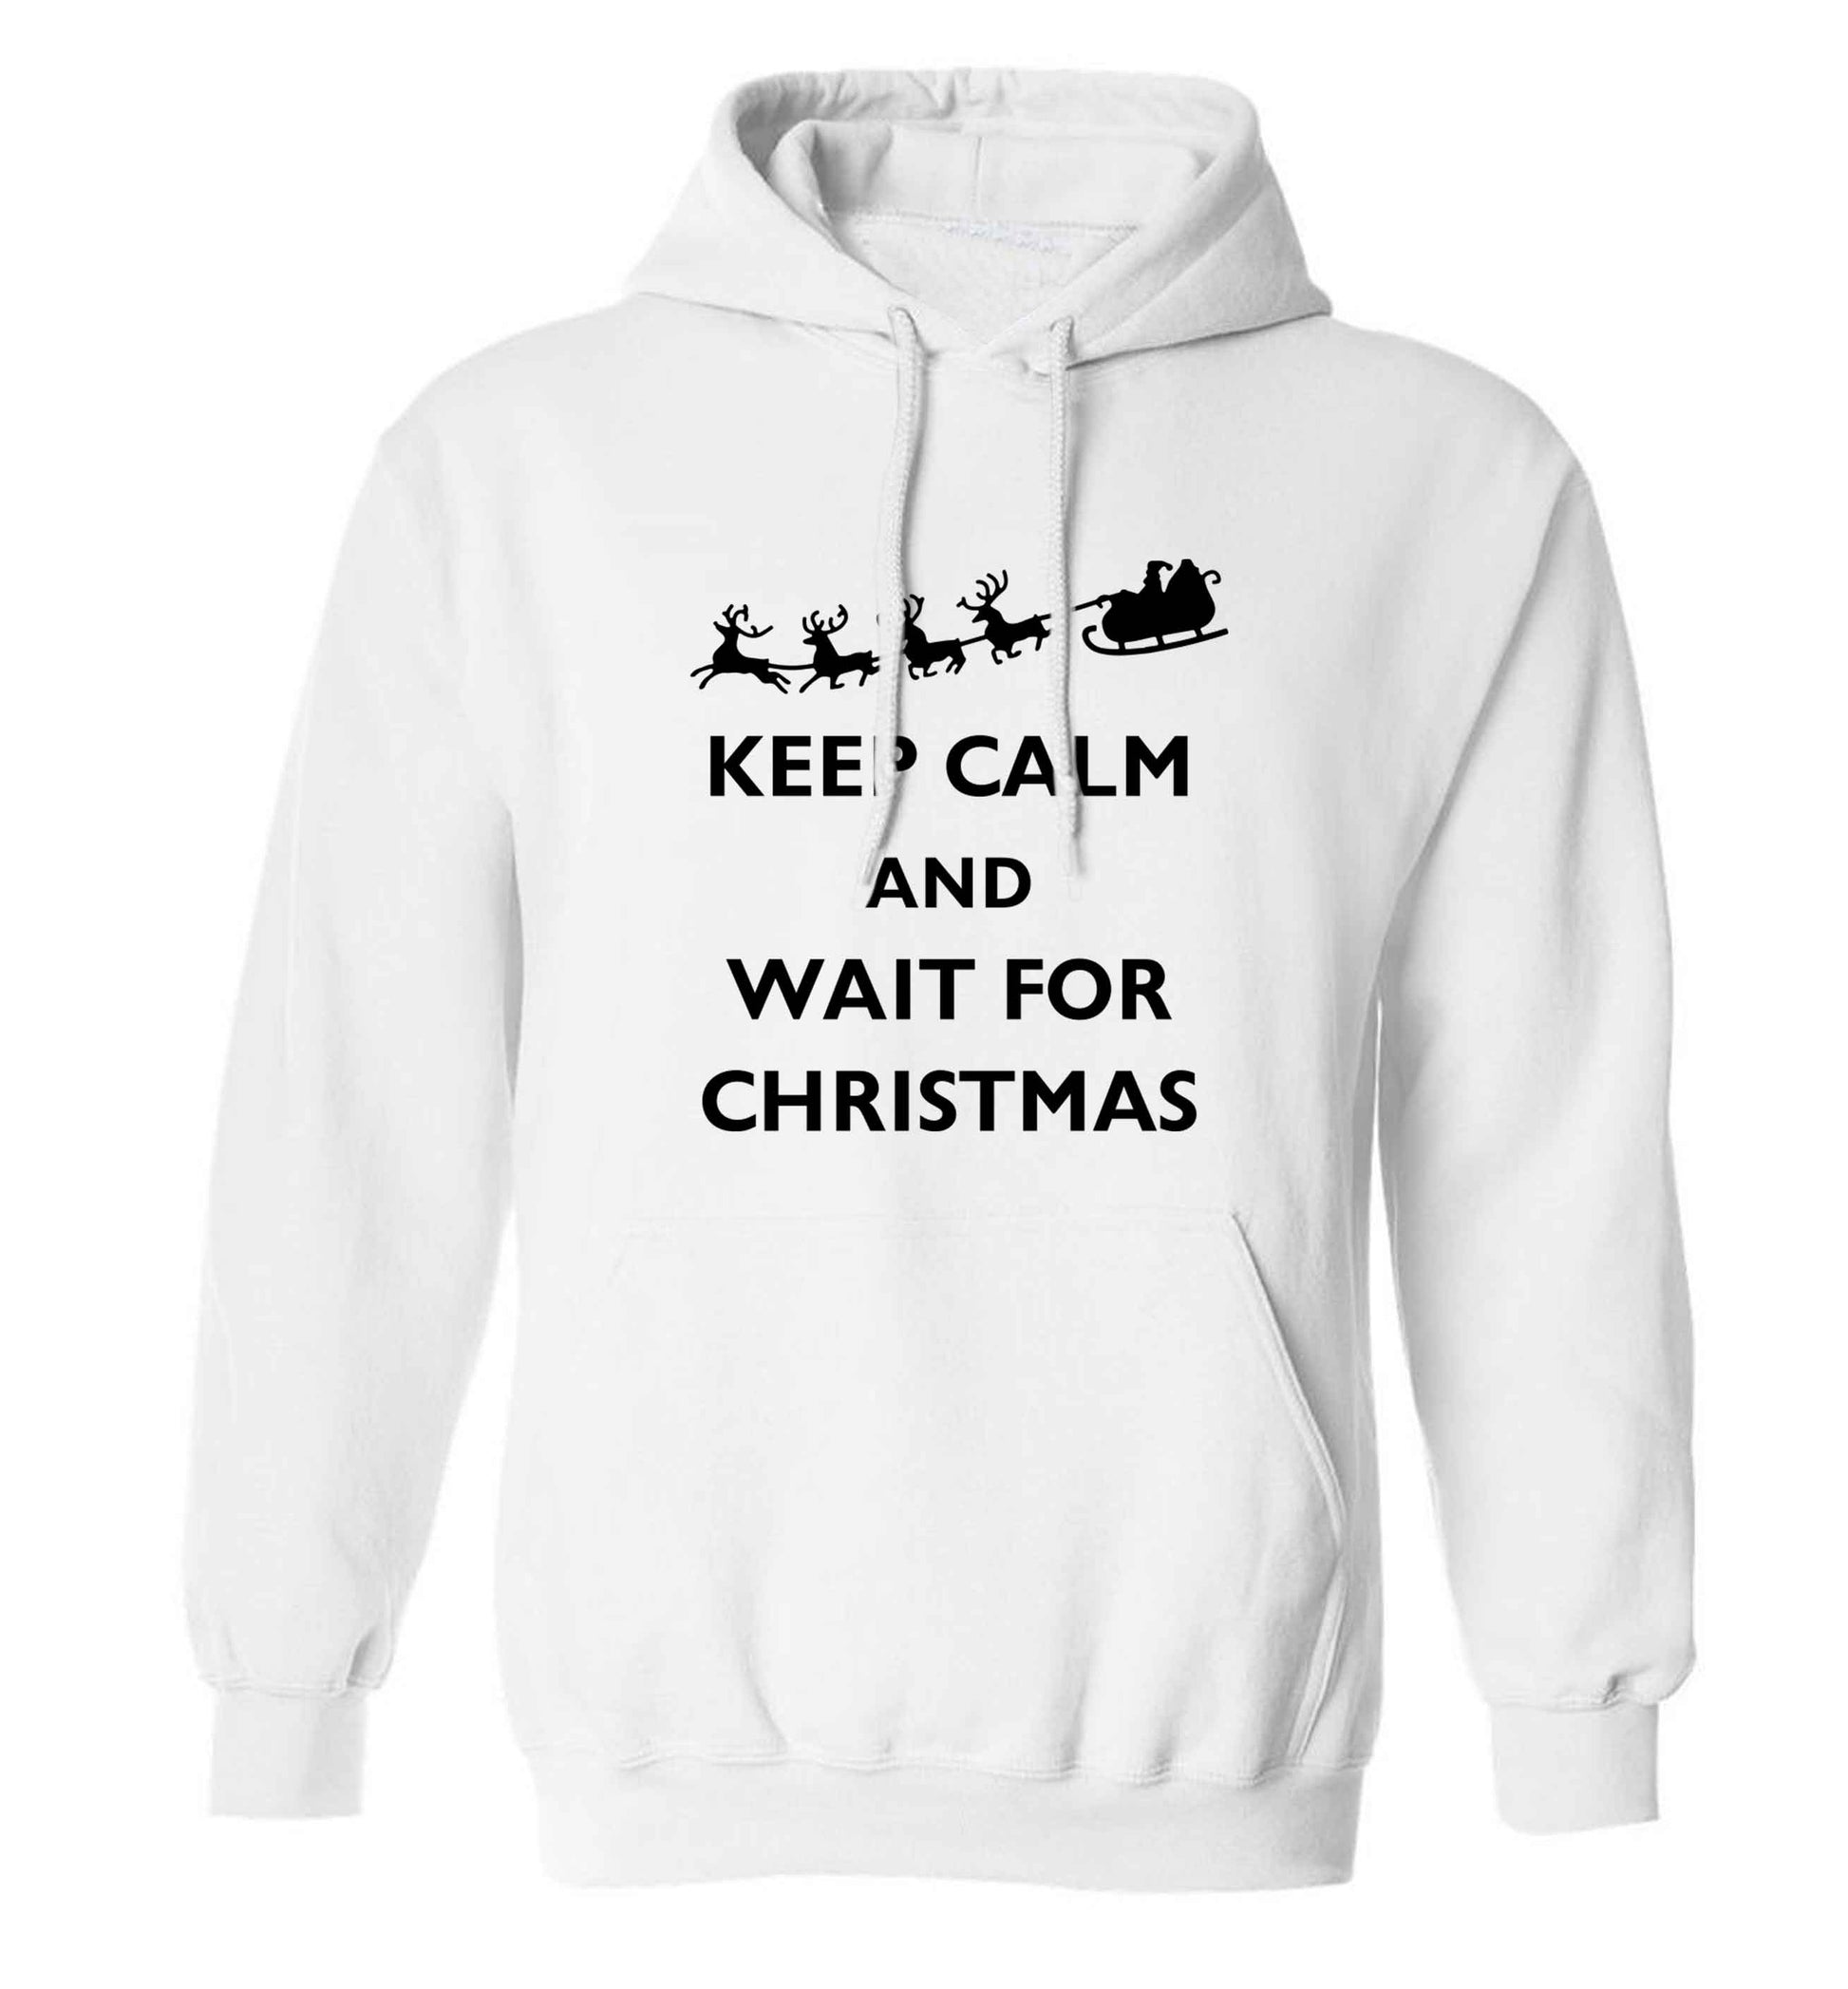 Keep calm and wait for Christmas adults unisex white hoodie 2XL